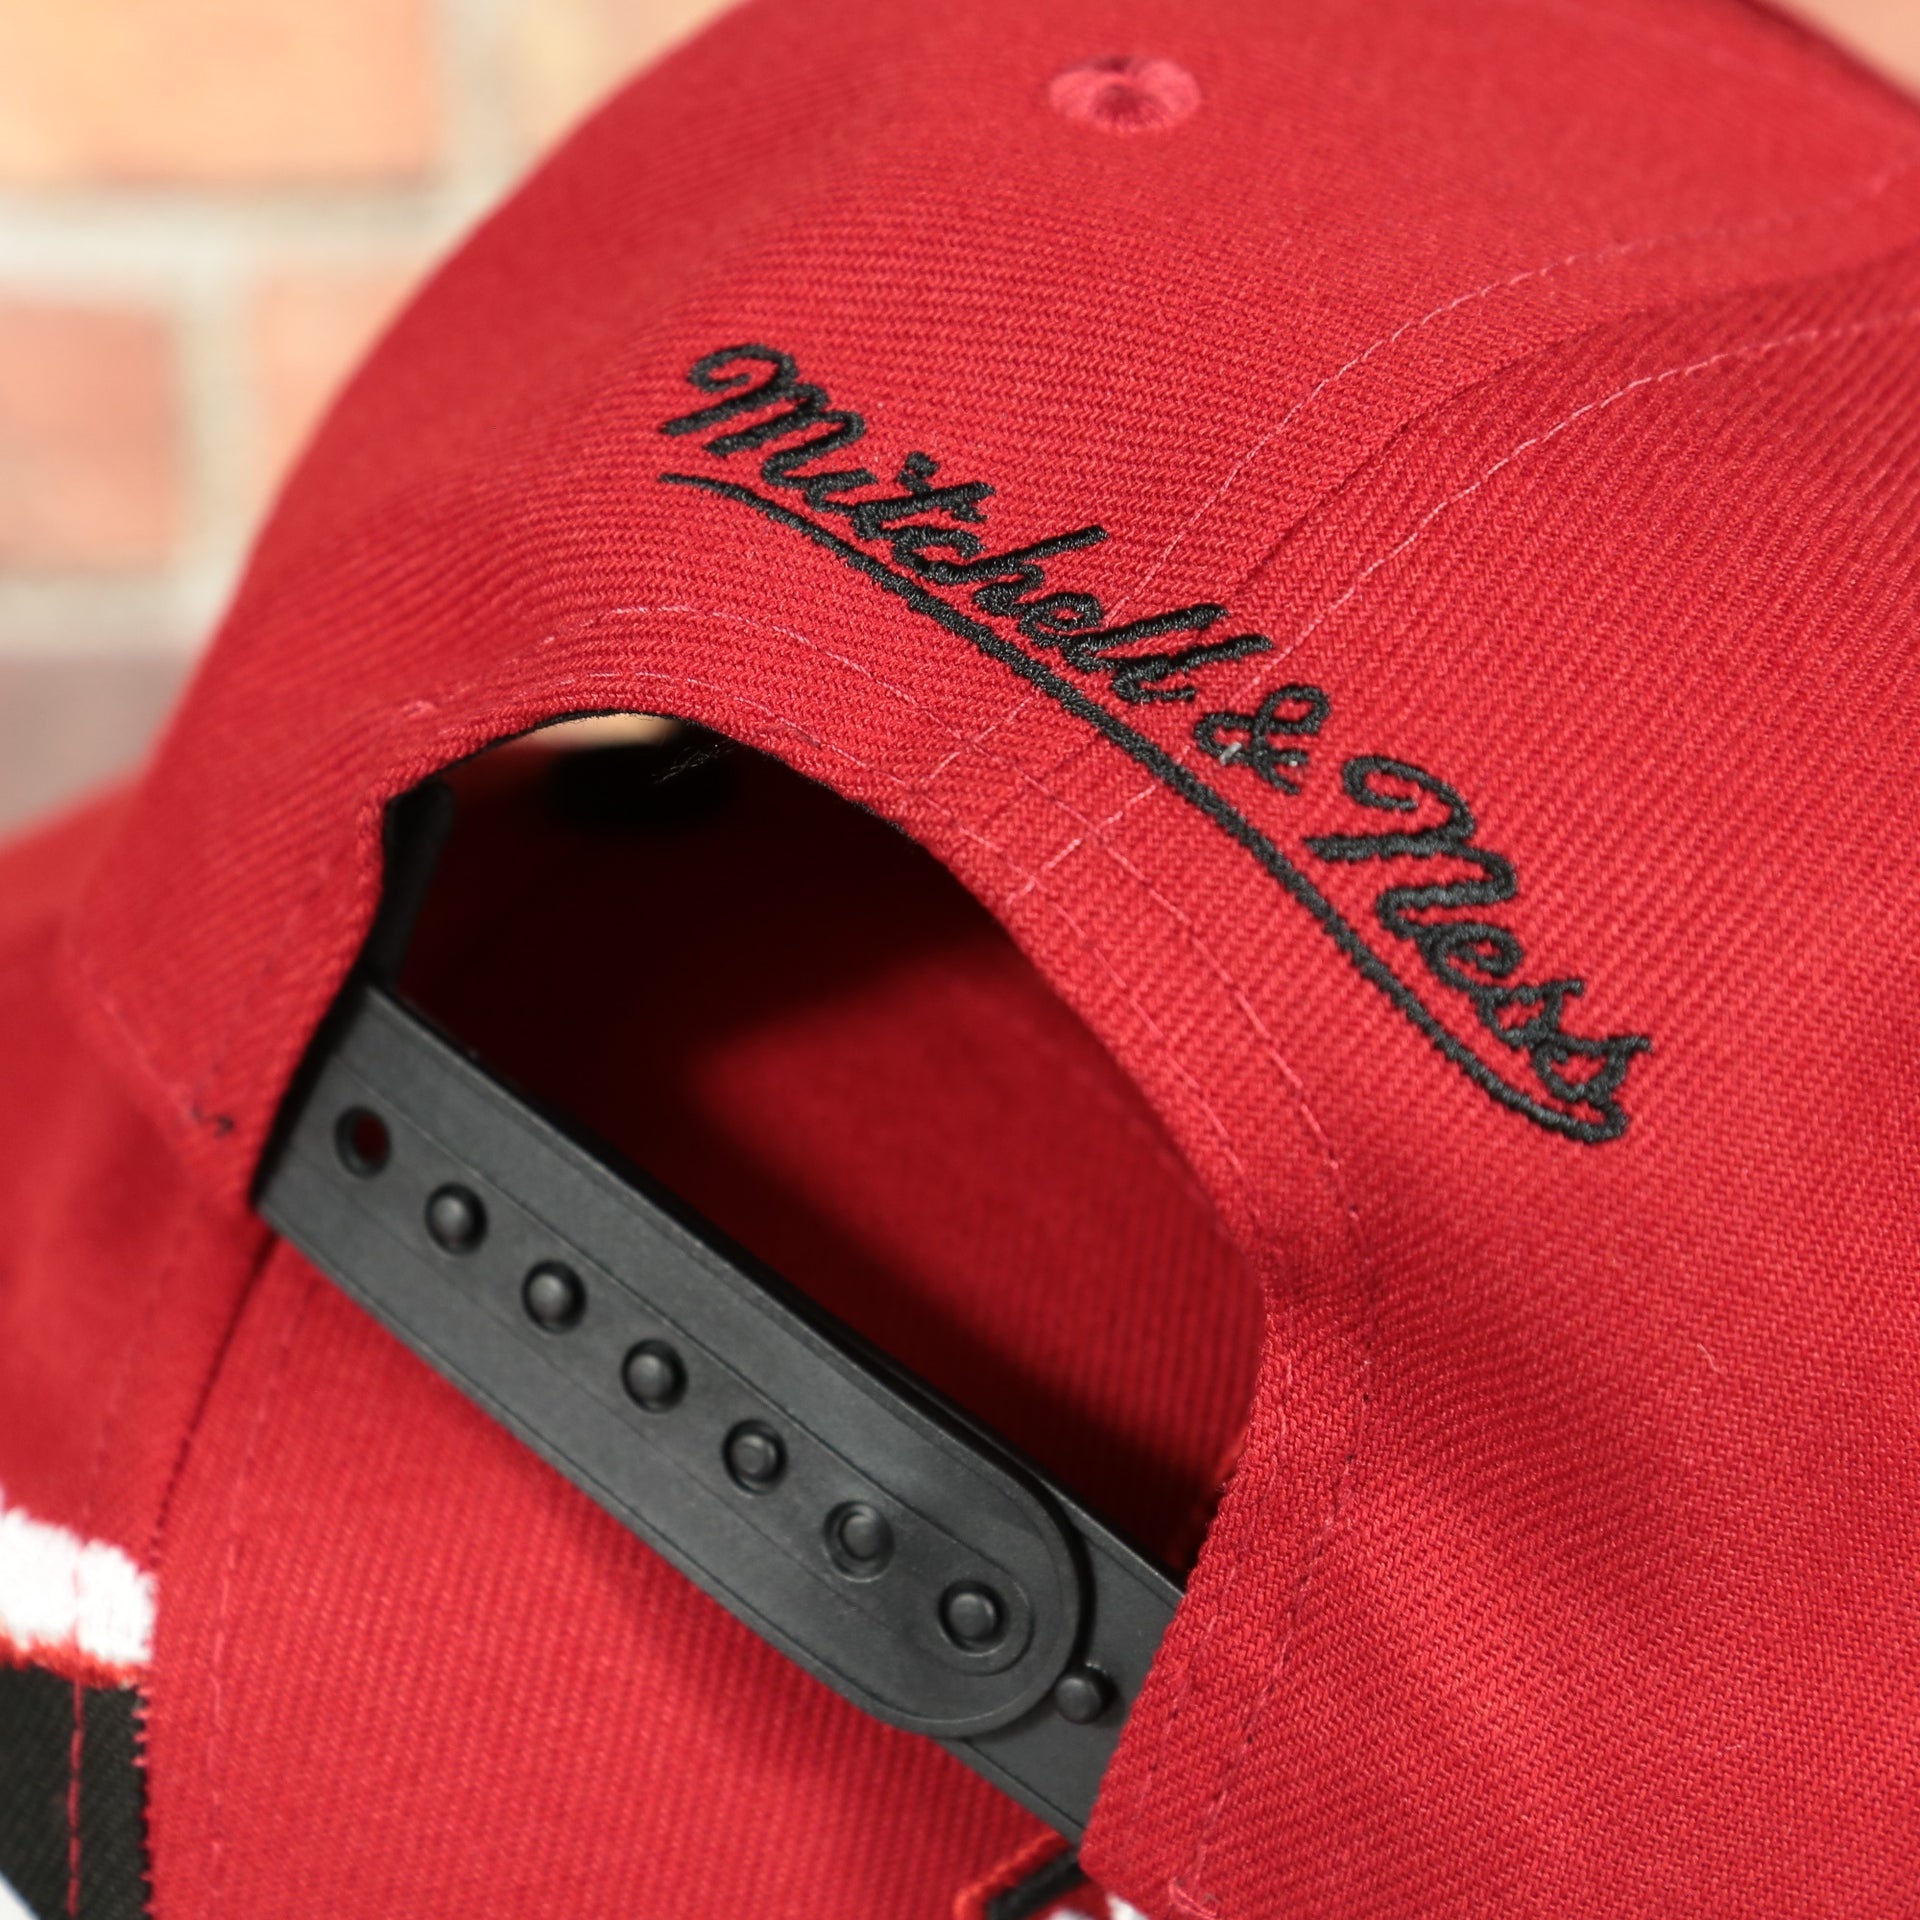 mitchell and ness logo on the Ohio State Buckeyes NCAA Jumbotron "Ohio State" Ripped Wordmark side patch Grey Bottom Red/Black Snapback hat | Mitchell and Ness Two Tone Snap Cap